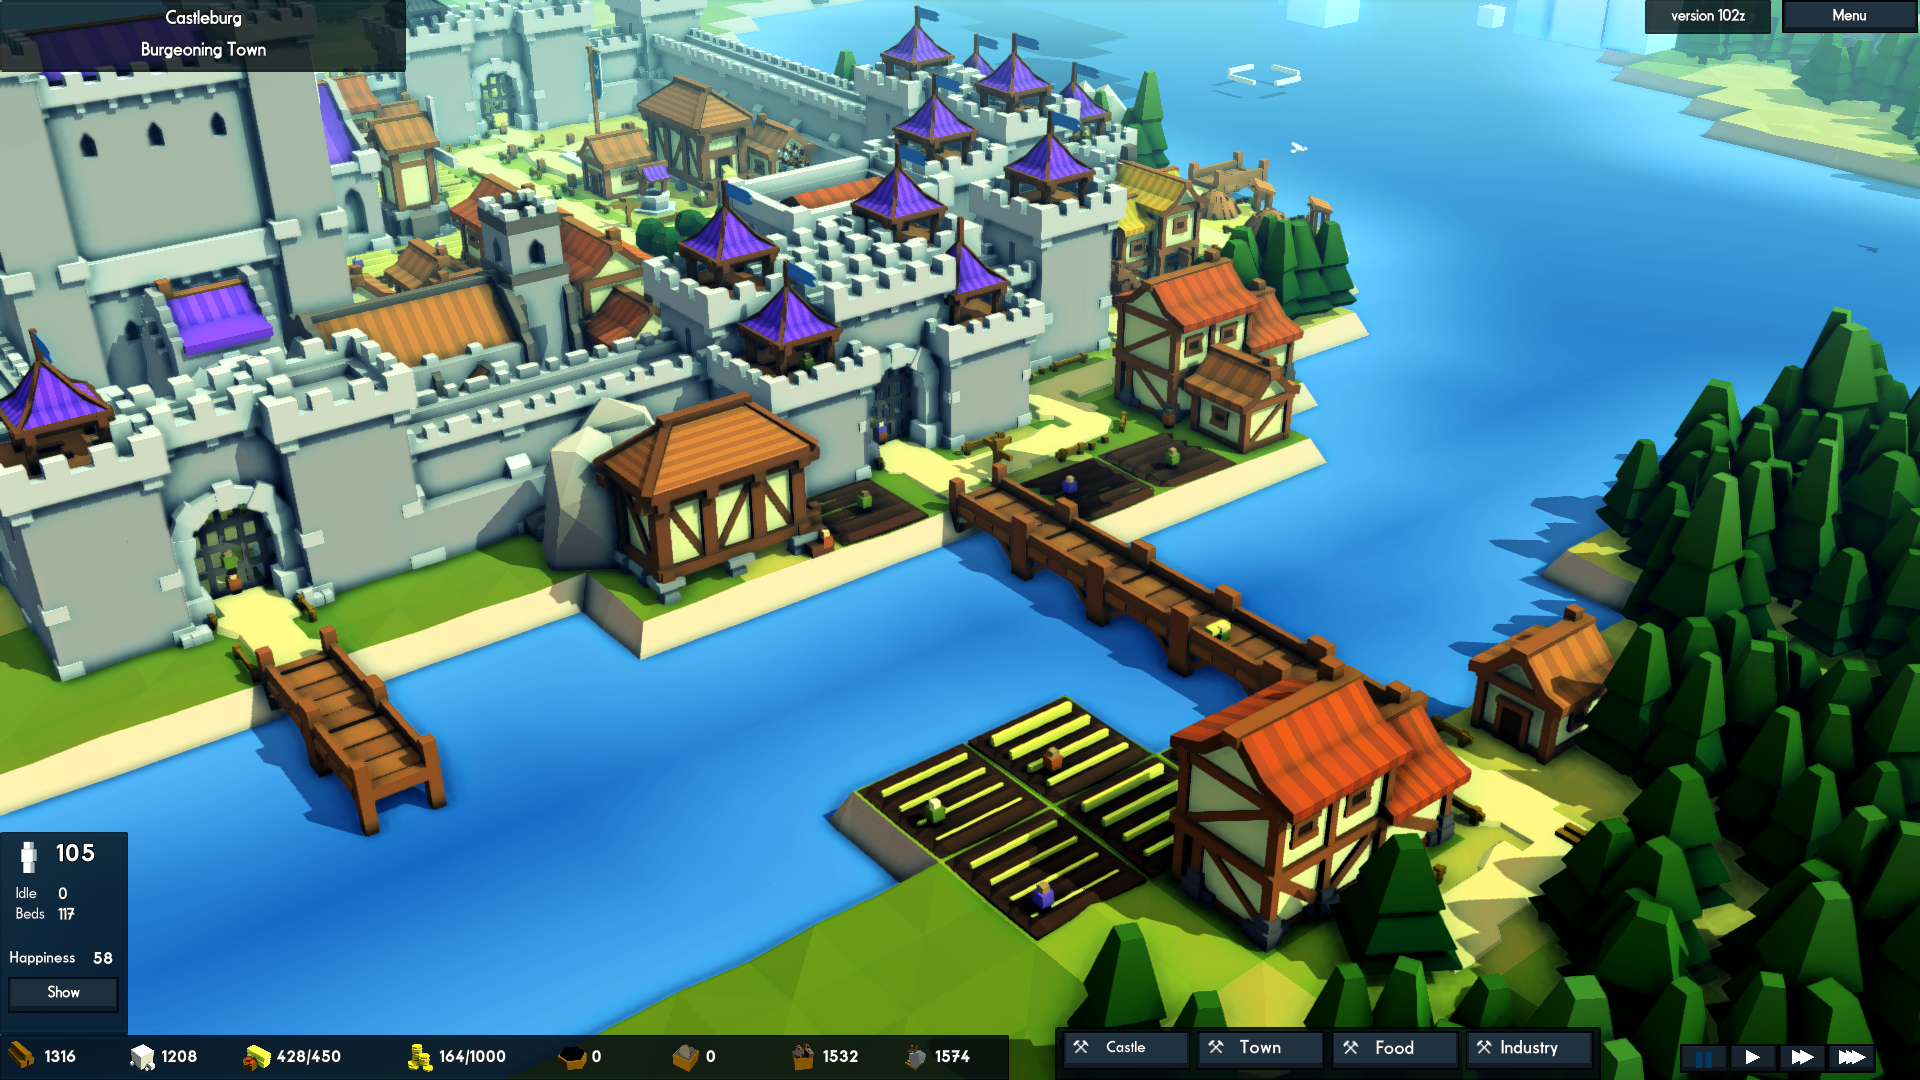 Linux Gaming - Kingdoms and Castles on Linux